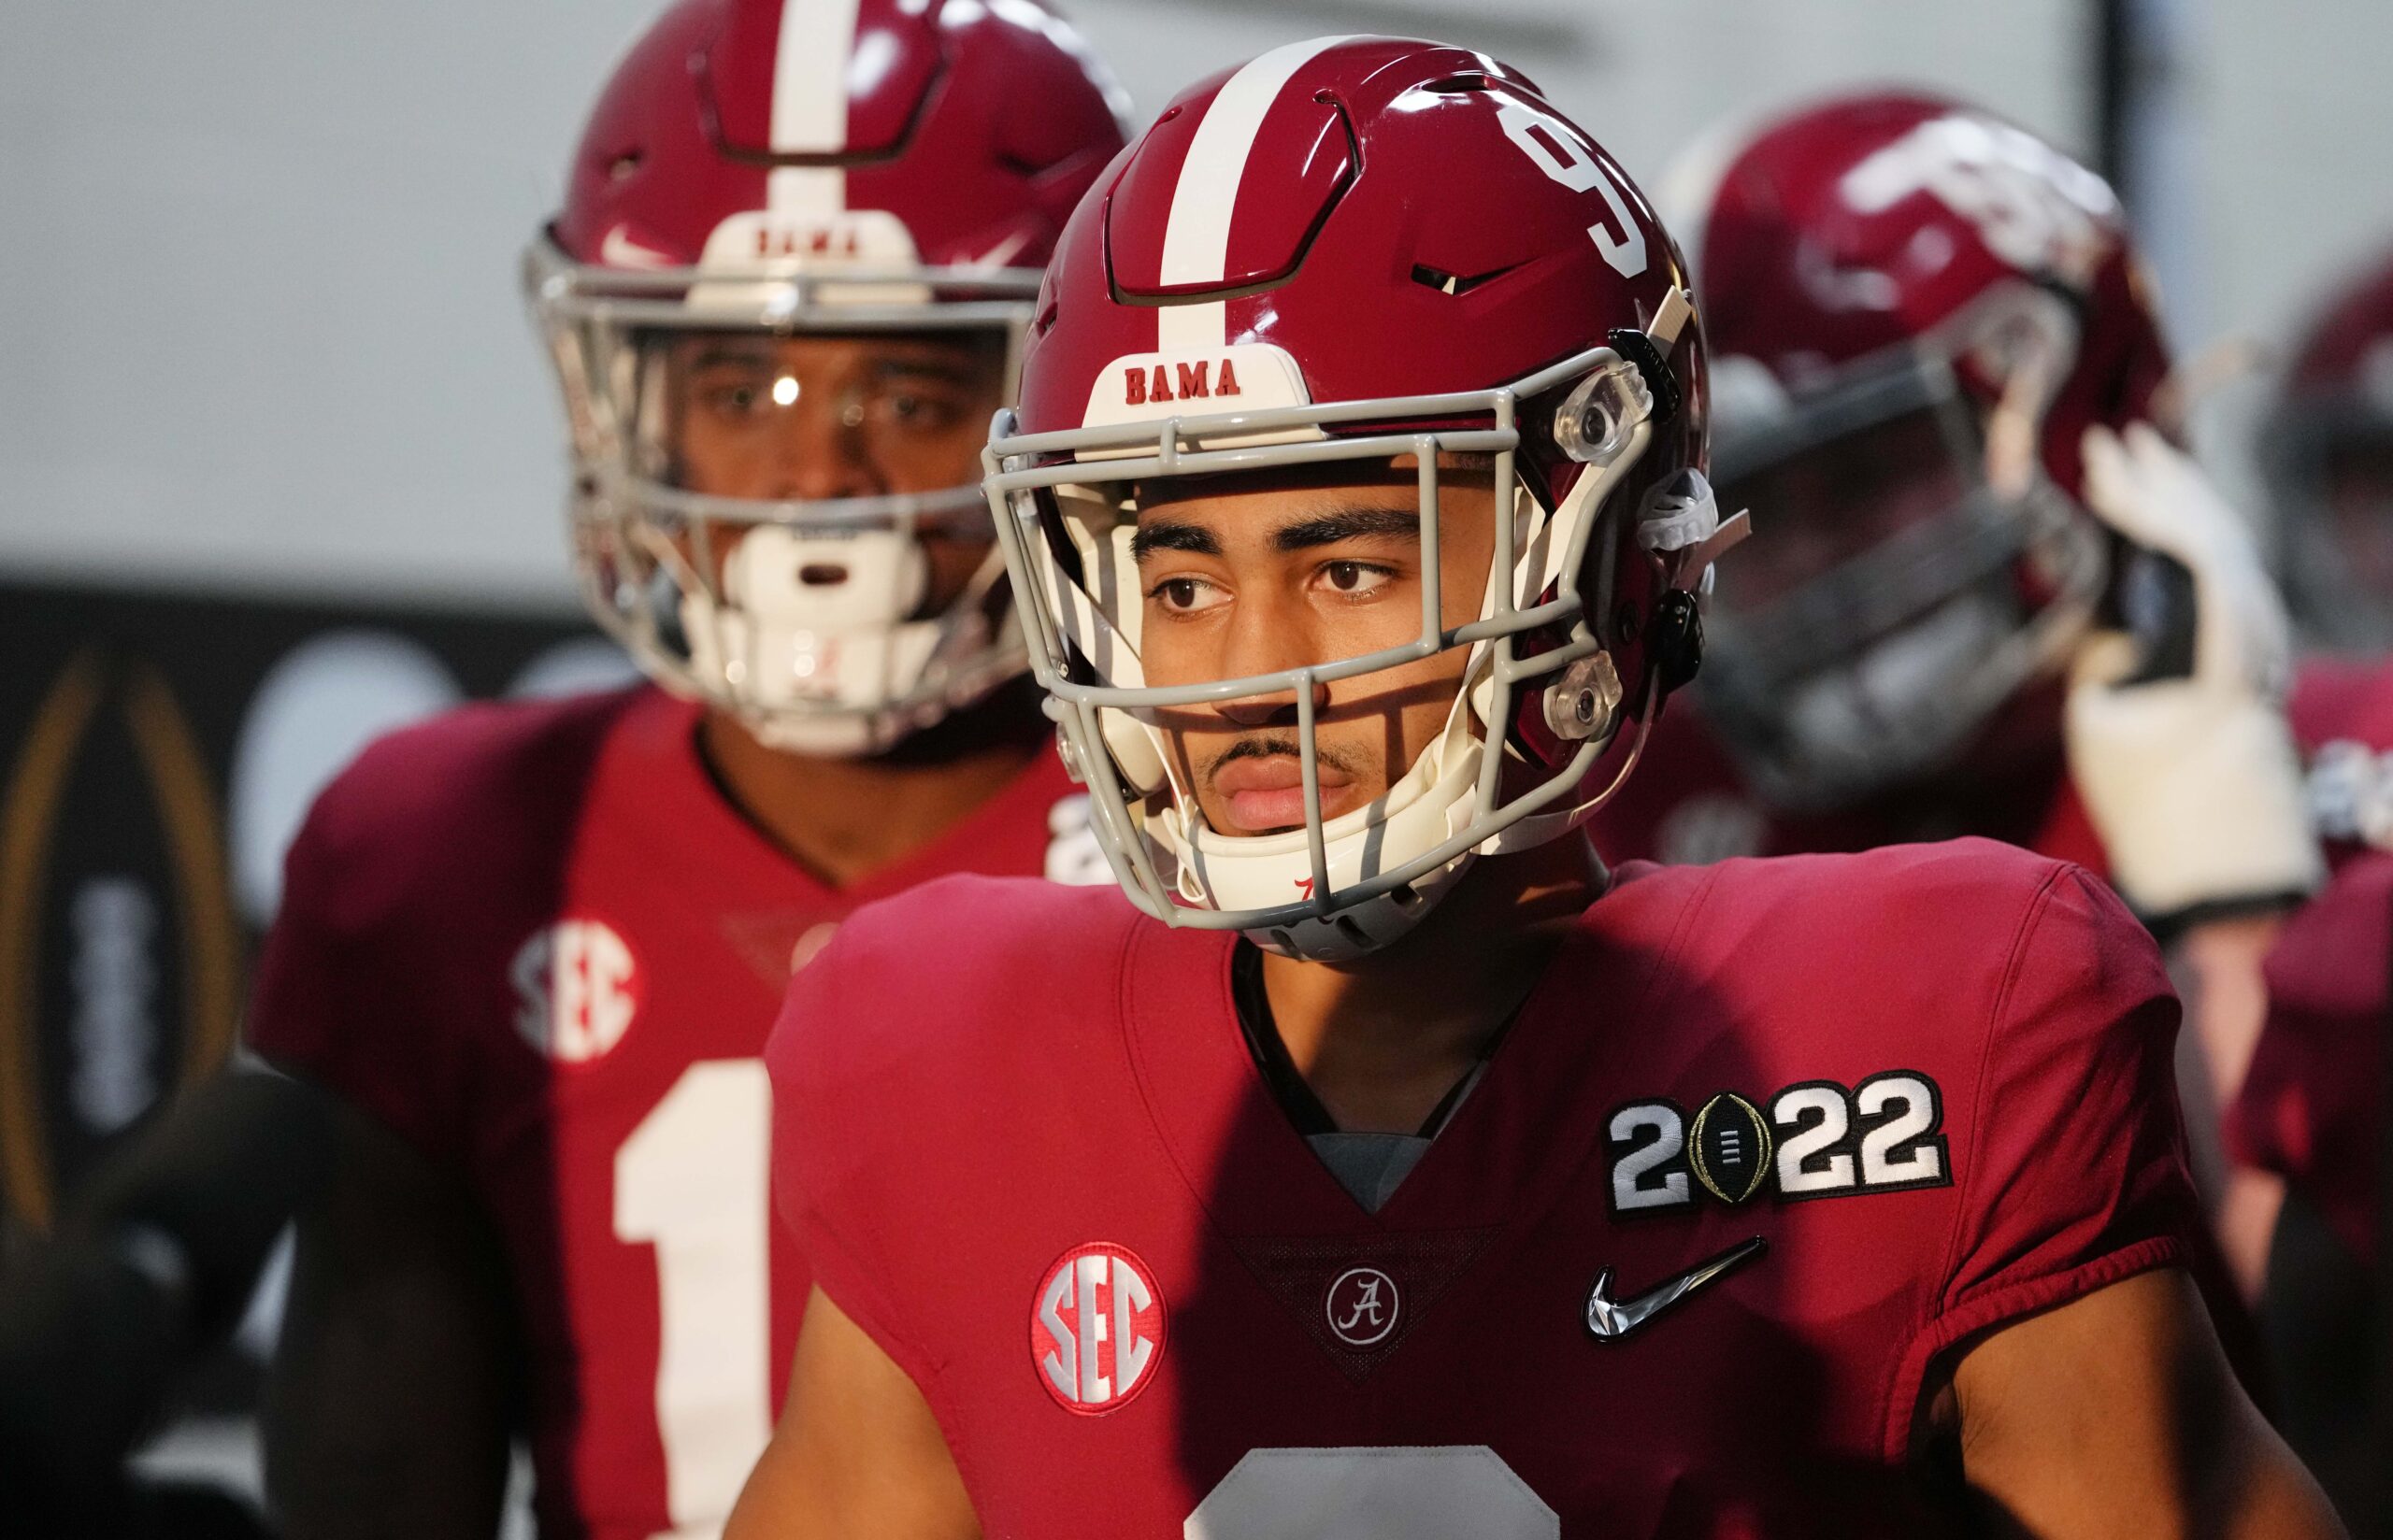 Alabama QB Bryce Young coming out of the tunnel with his teammates.